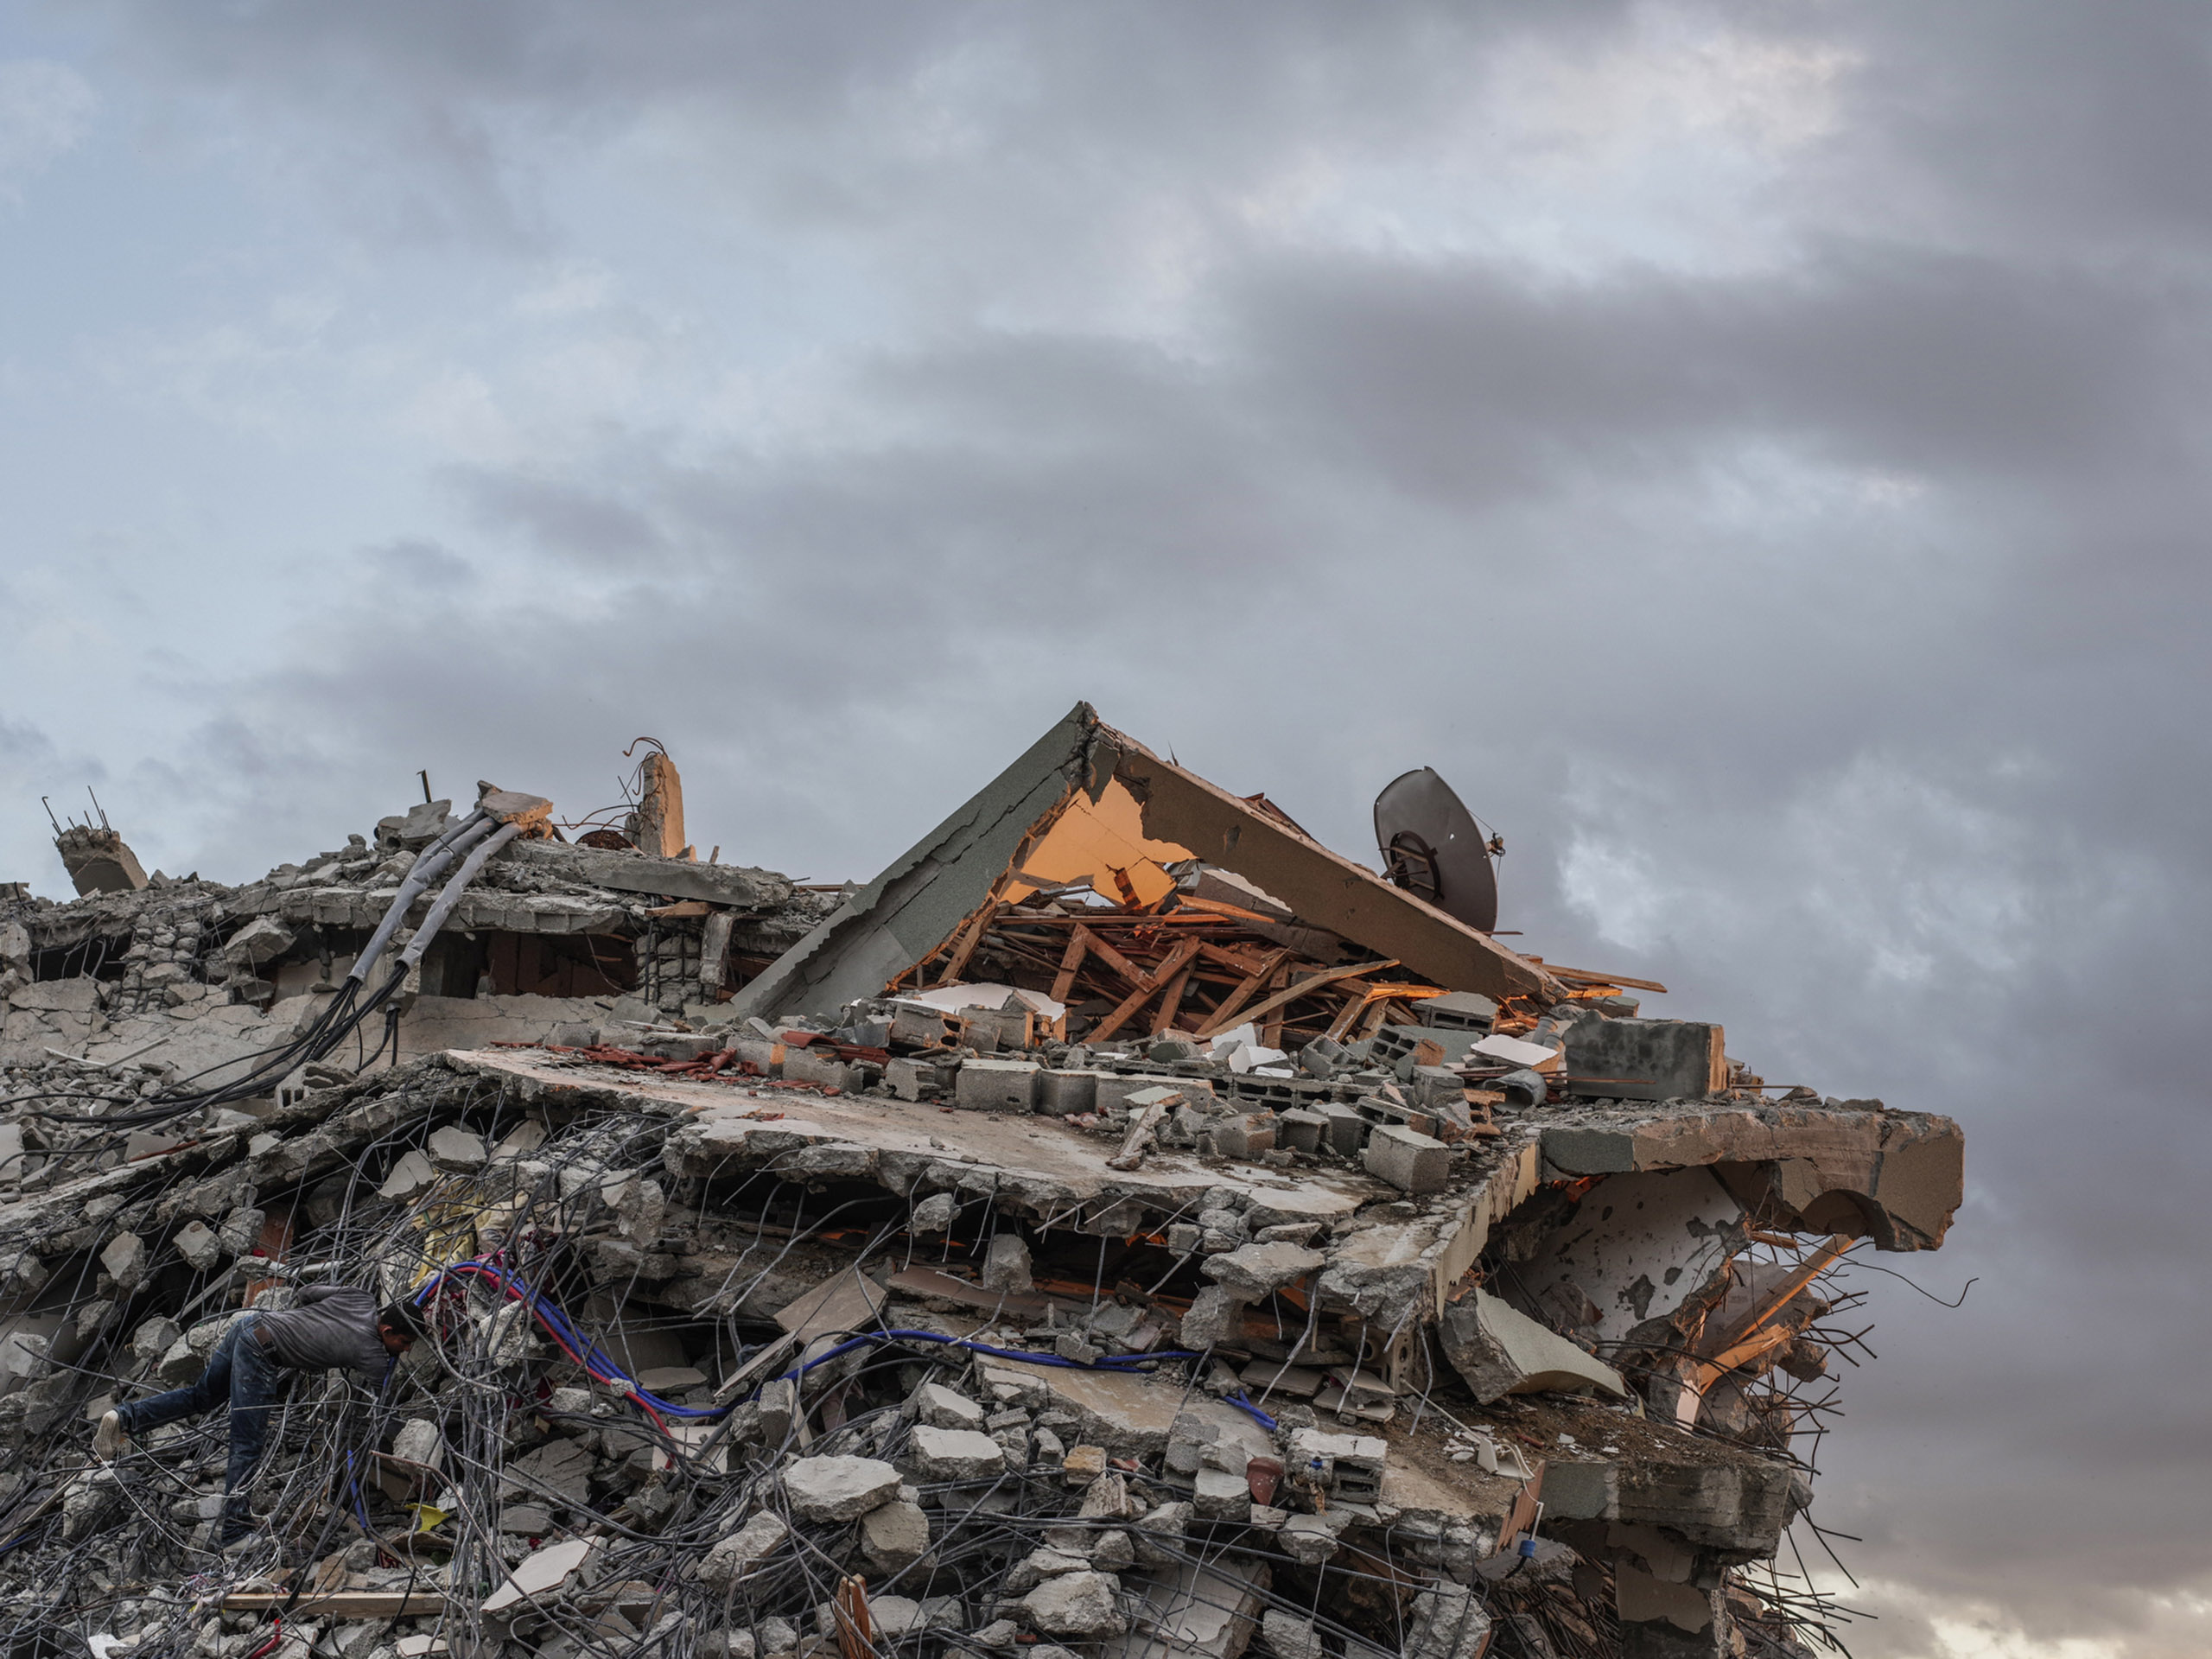 A man salvages scrap from a destroyed building in the Shujai'iya neighborhood, Gaza.